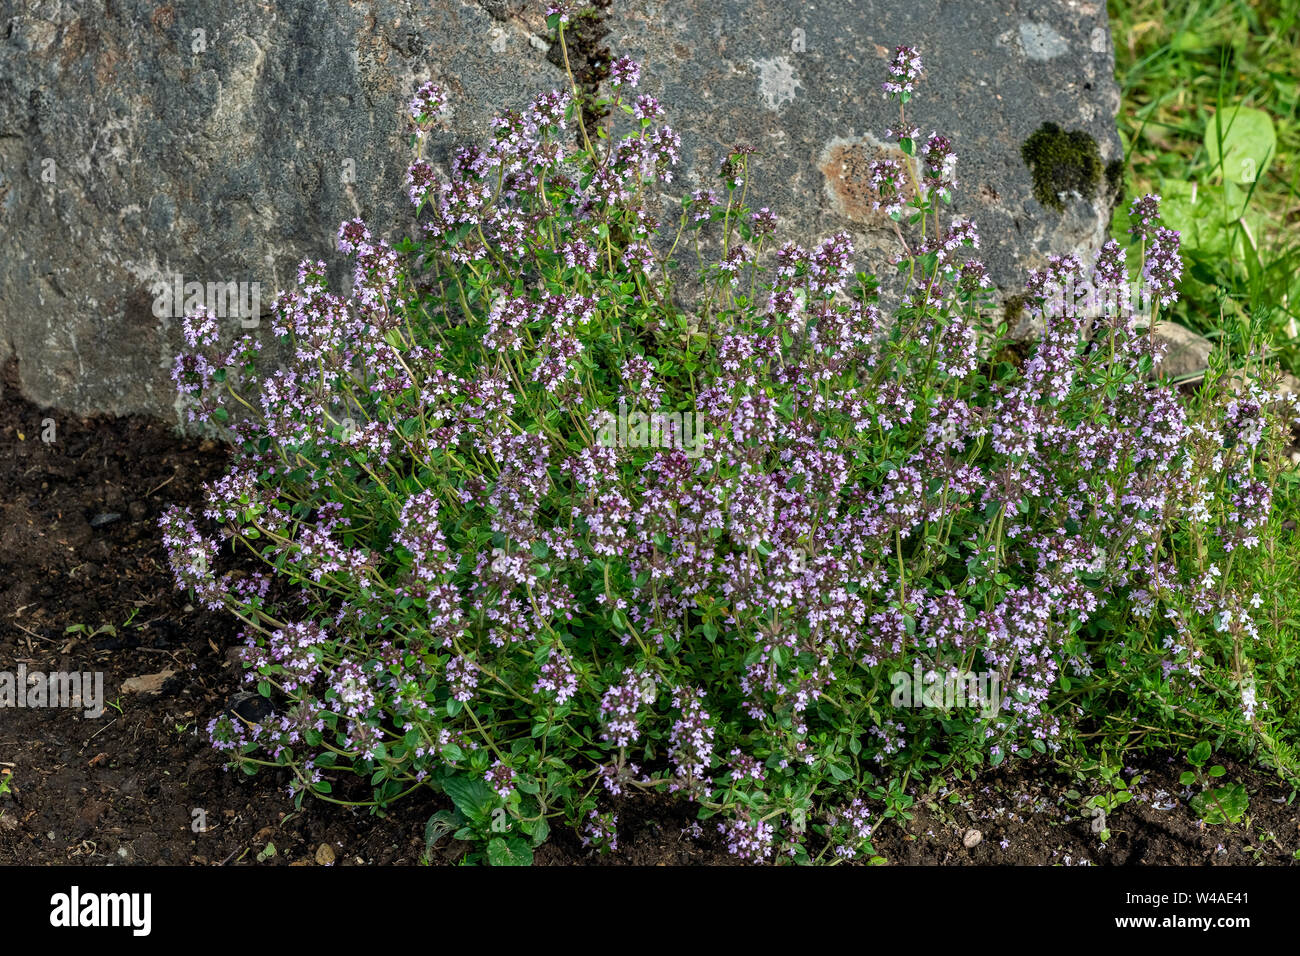 Flowering bushes of thyme on a background of gray stone. Stock Photo